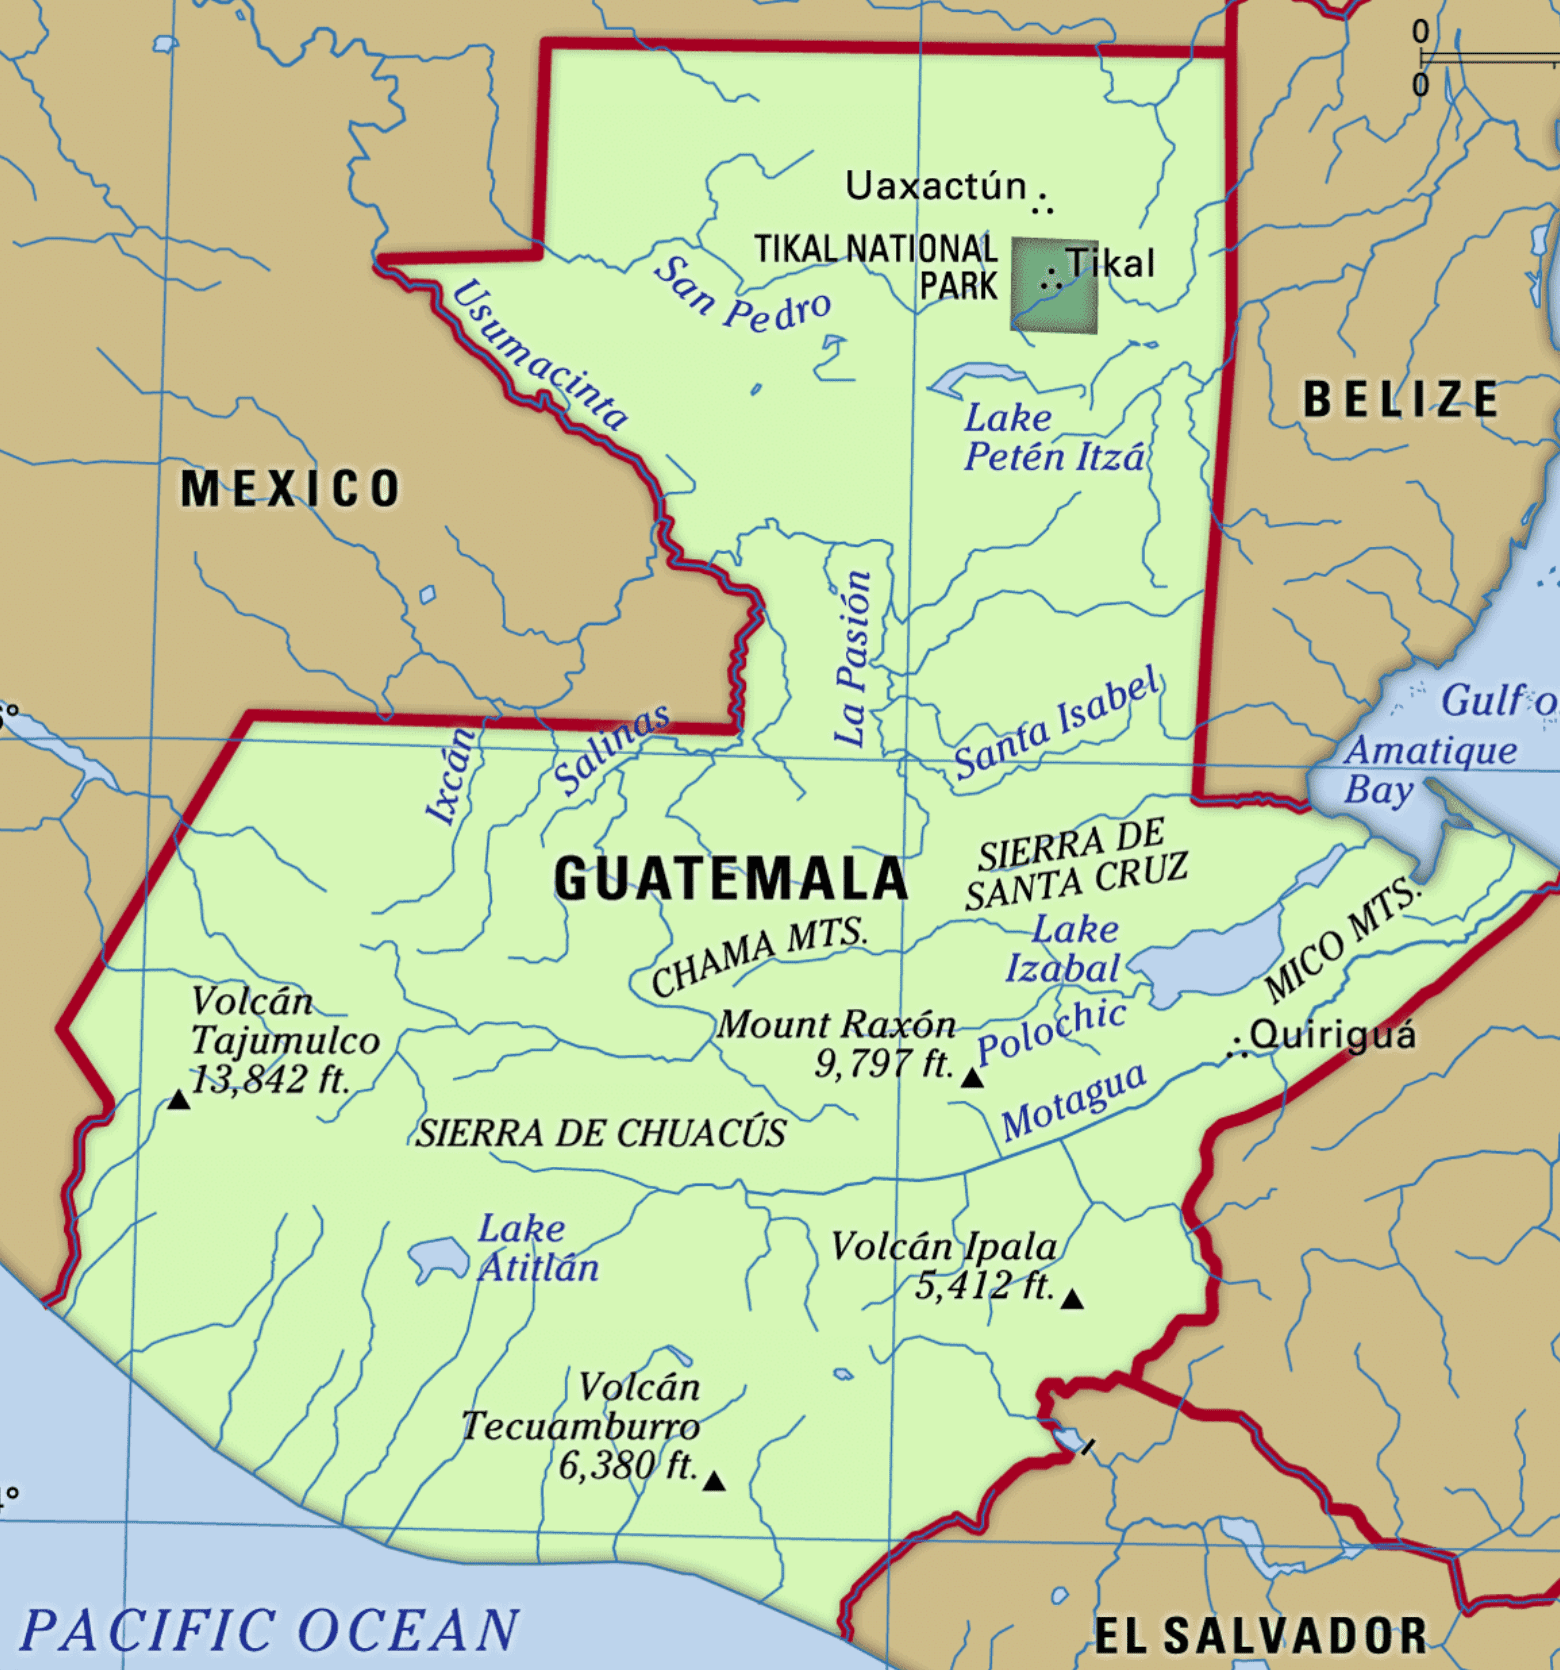 Map of Guatemala backpacking trip, a relatively small country rich in maya culture and mayan ruins.